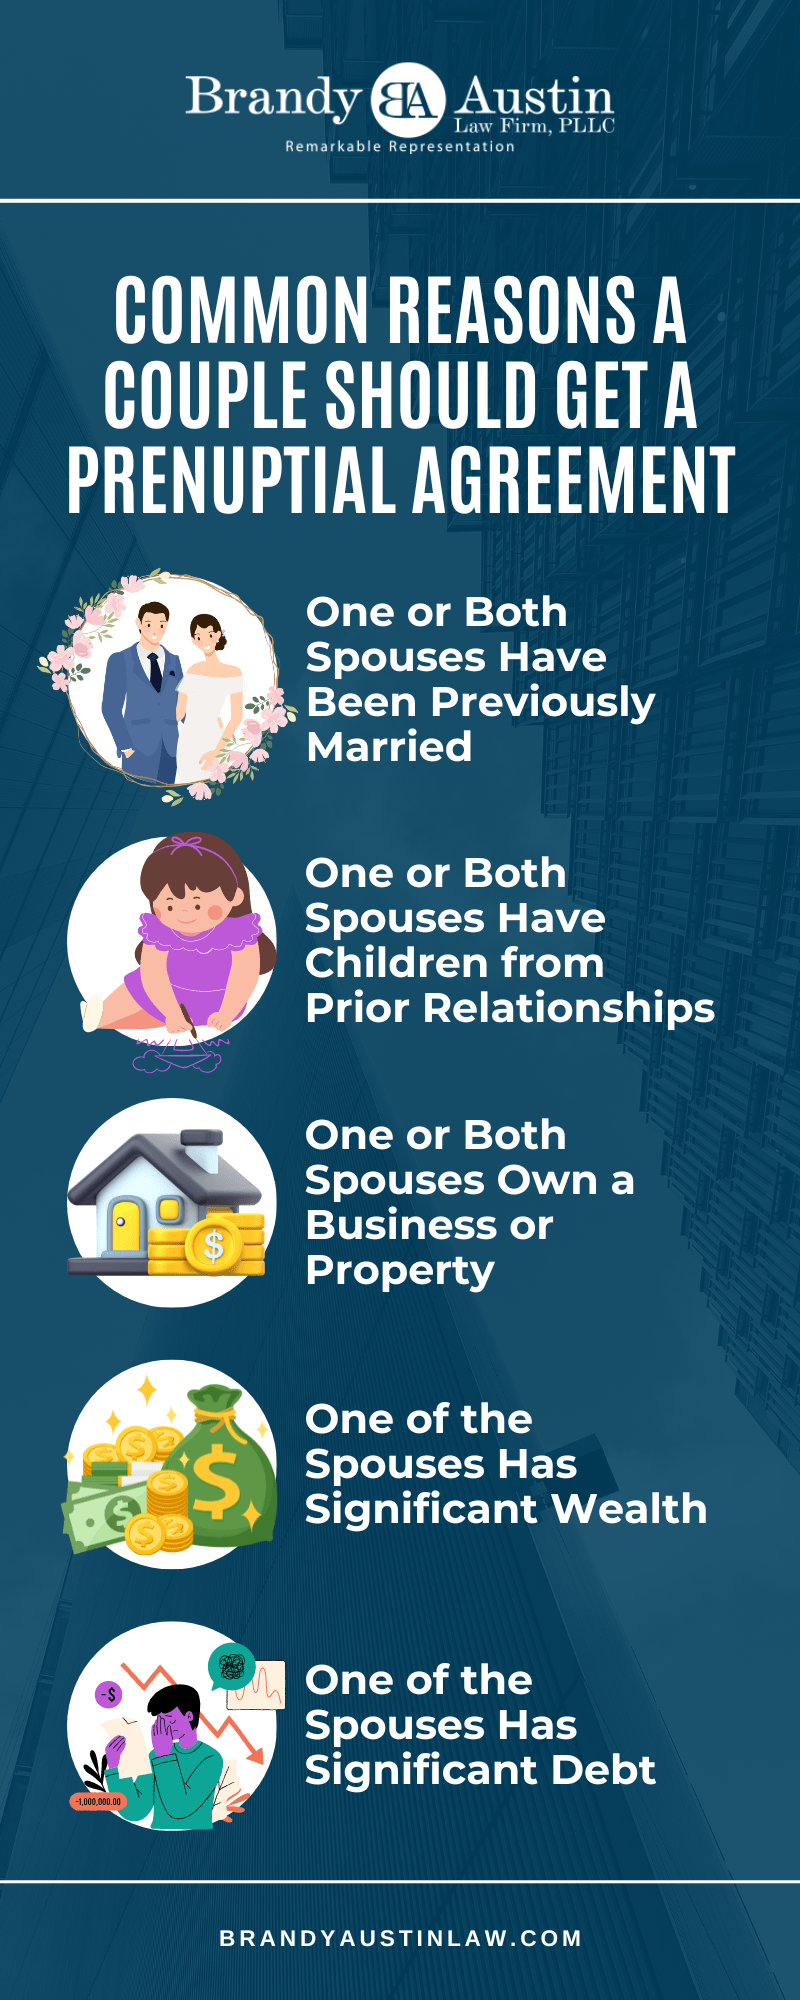 Common Reasons A Couple Should Get A Prenuptial Agreement Infographic